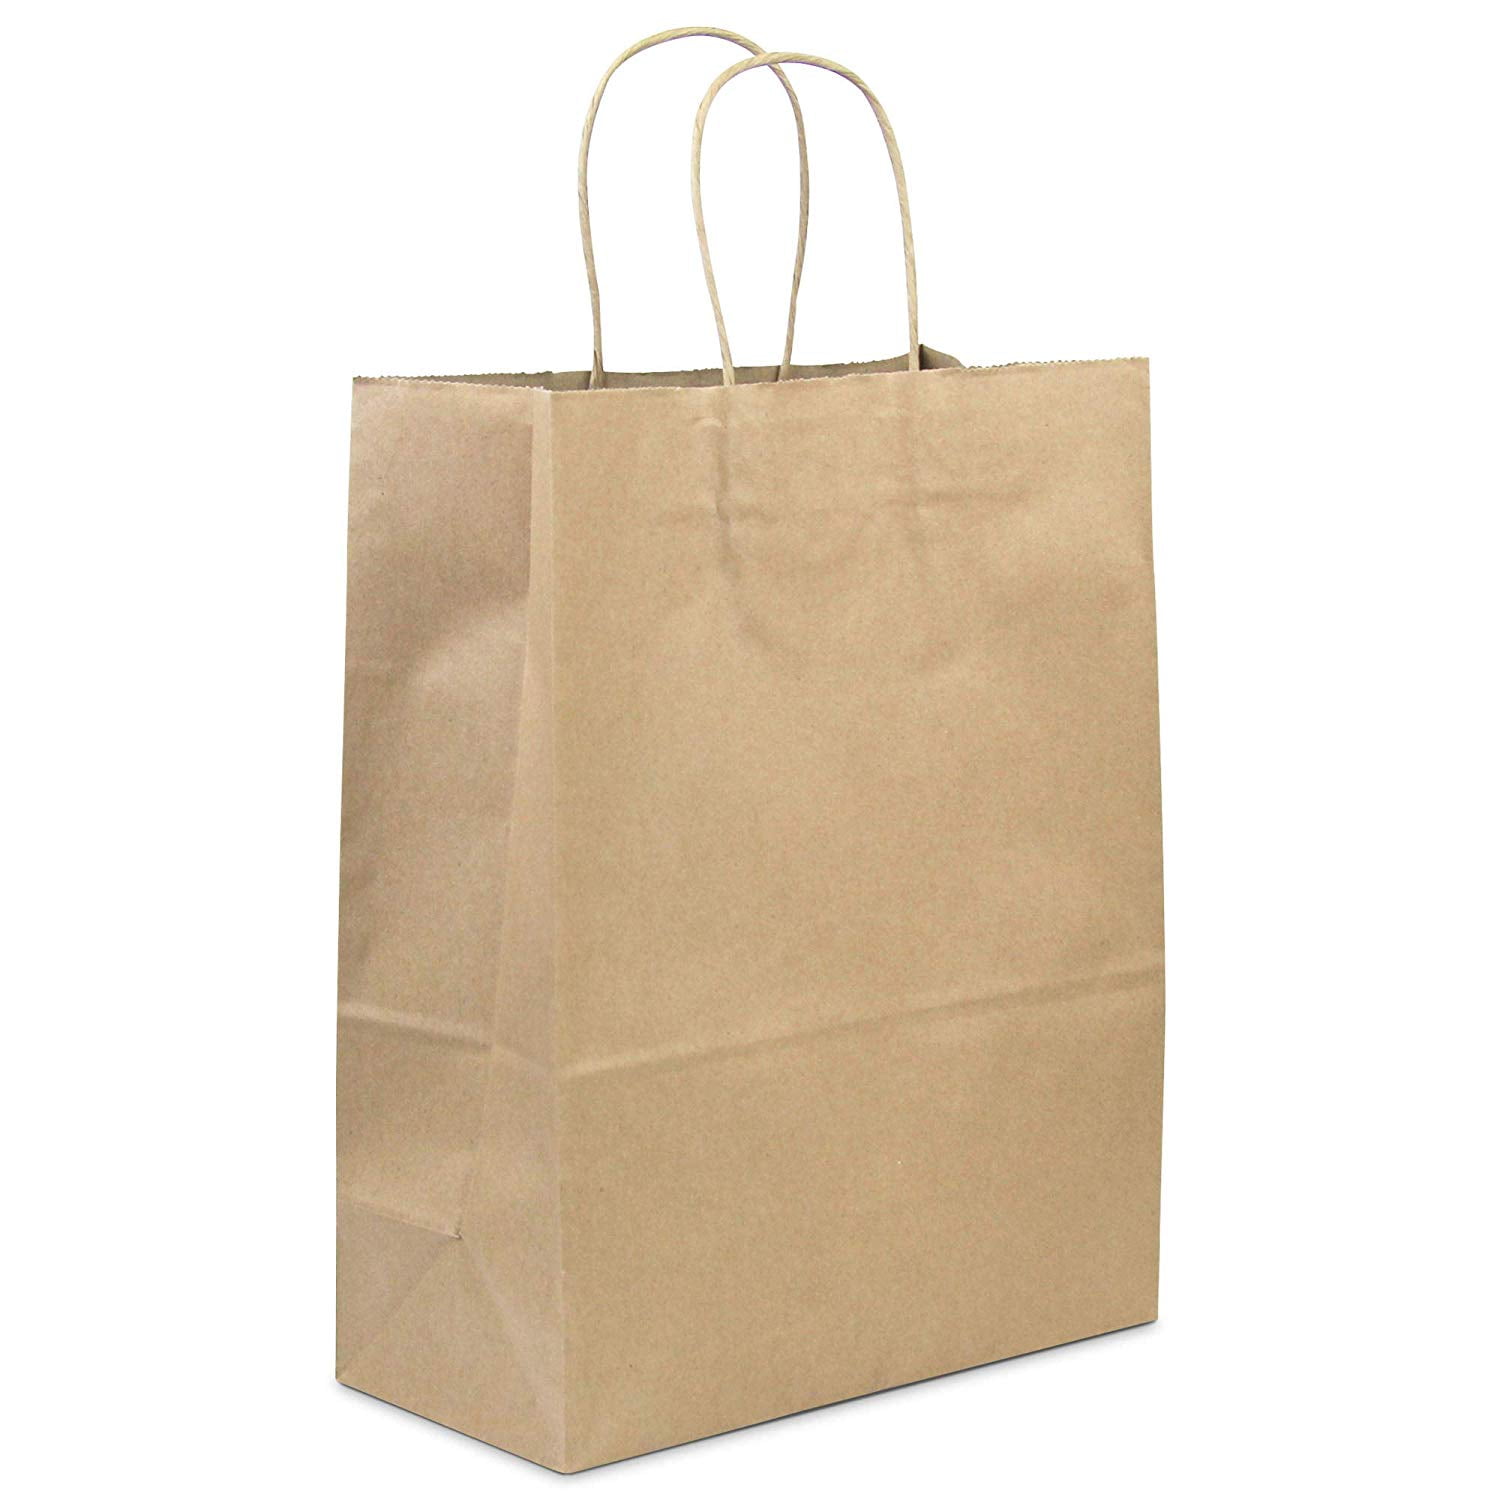 50 Paper Retail/Shopping Bags KRAFT with Rope Handles 16x6x12 TOTE 